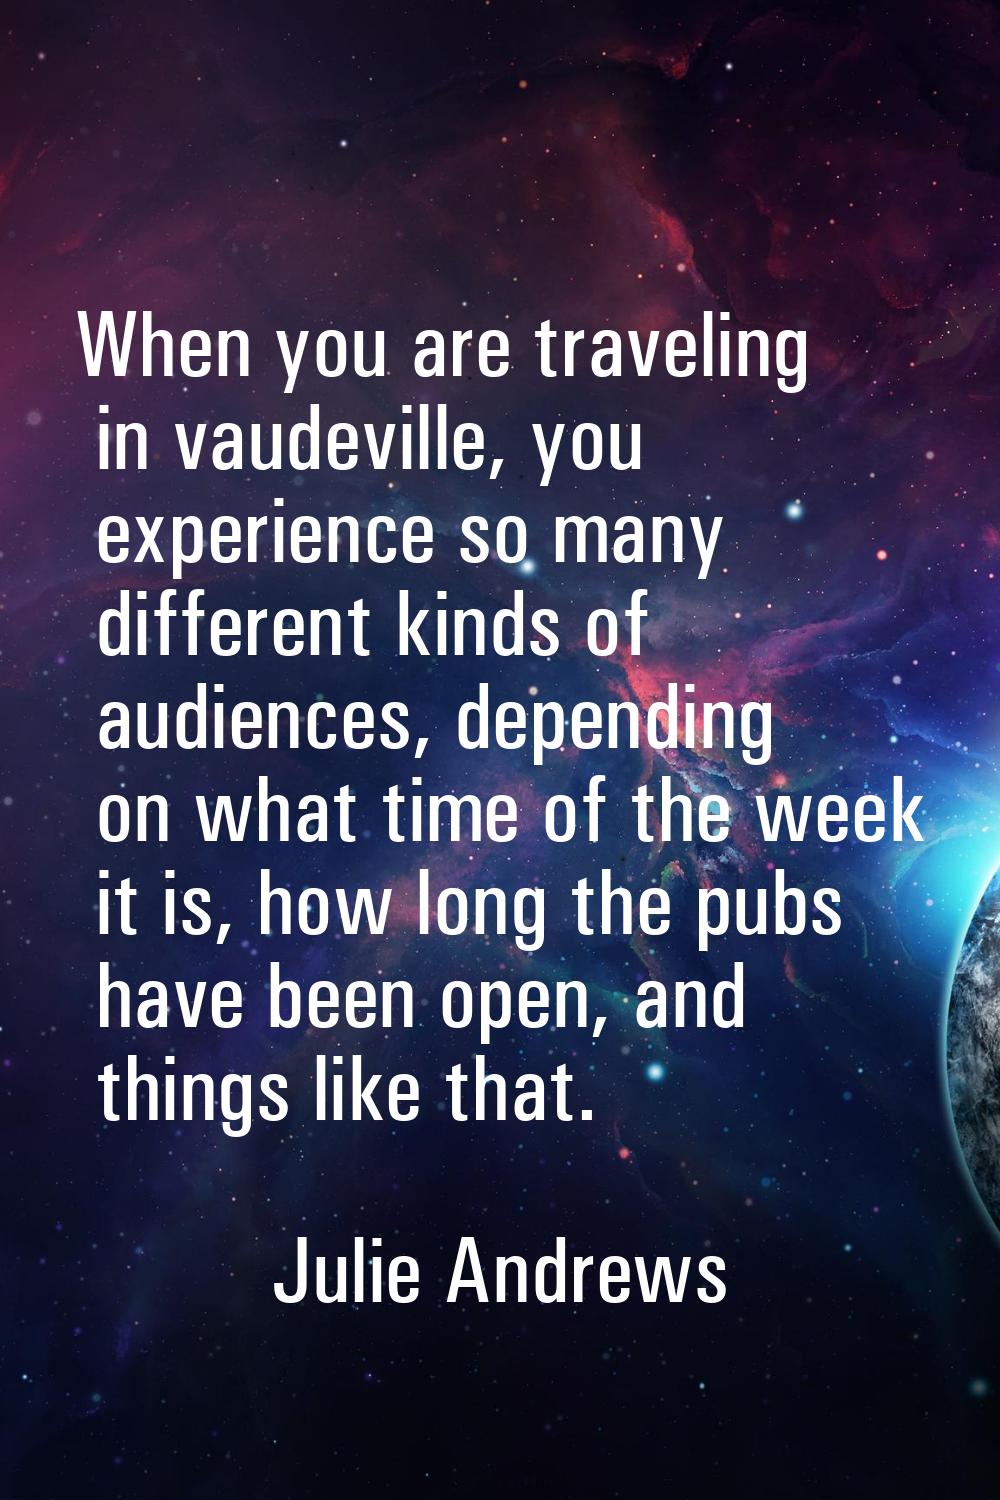 When you are traveling in vaudeville, you experience so many different kinds of audiences, dependin